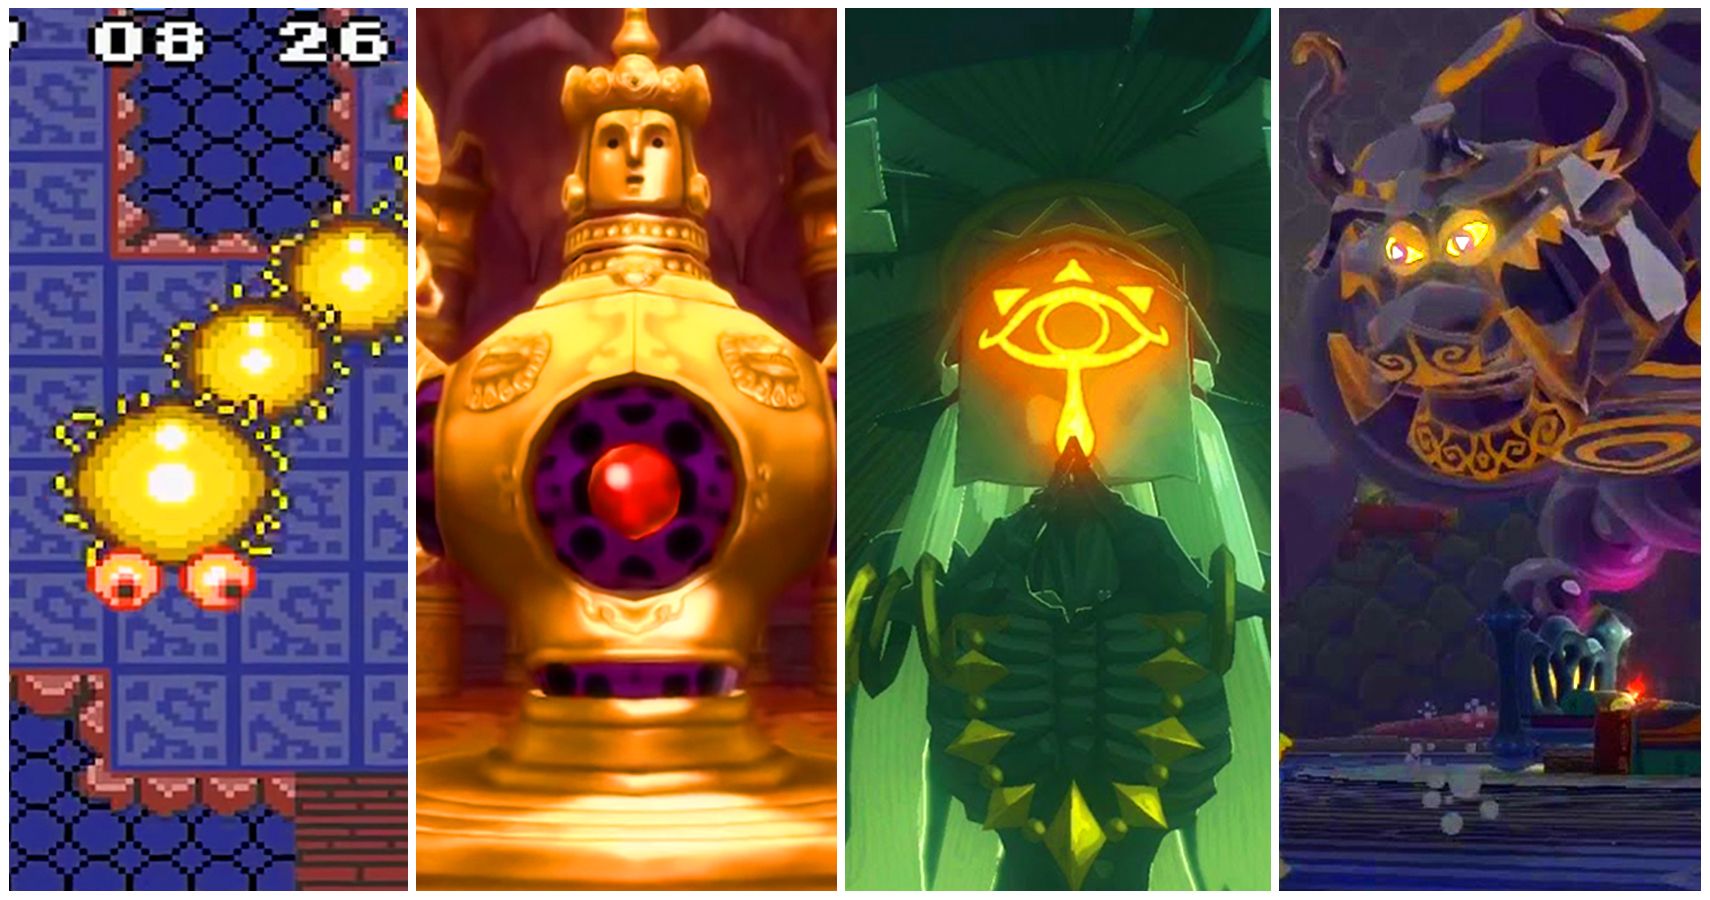 The 10 Hardest Boss Fights In Zelda History, Ranked | Game Rant